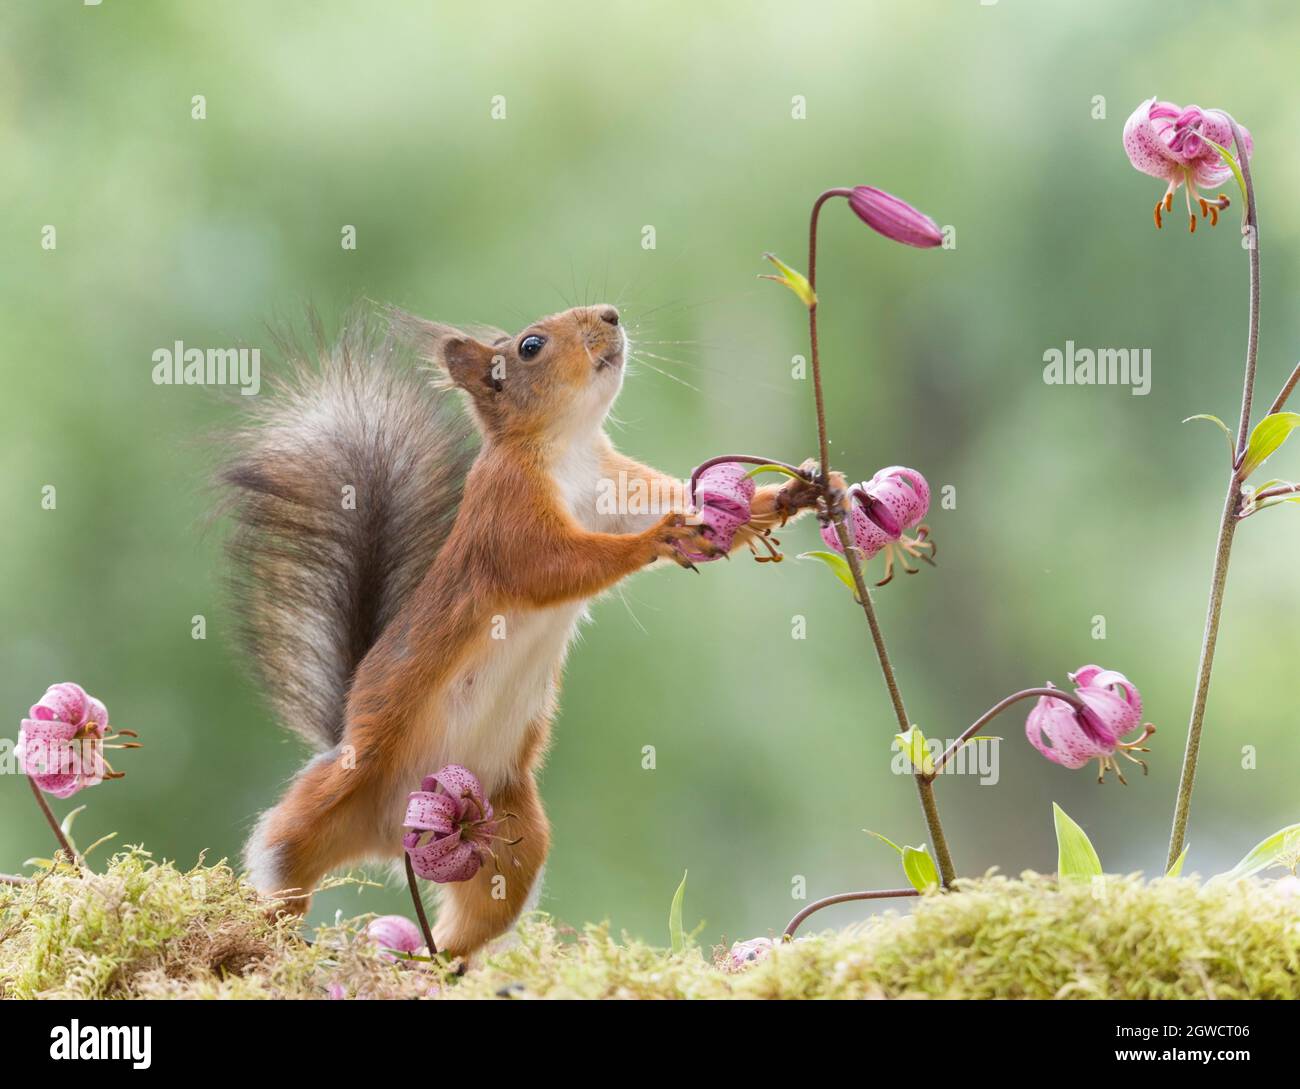 red squirrel holding a lily Stock Photo